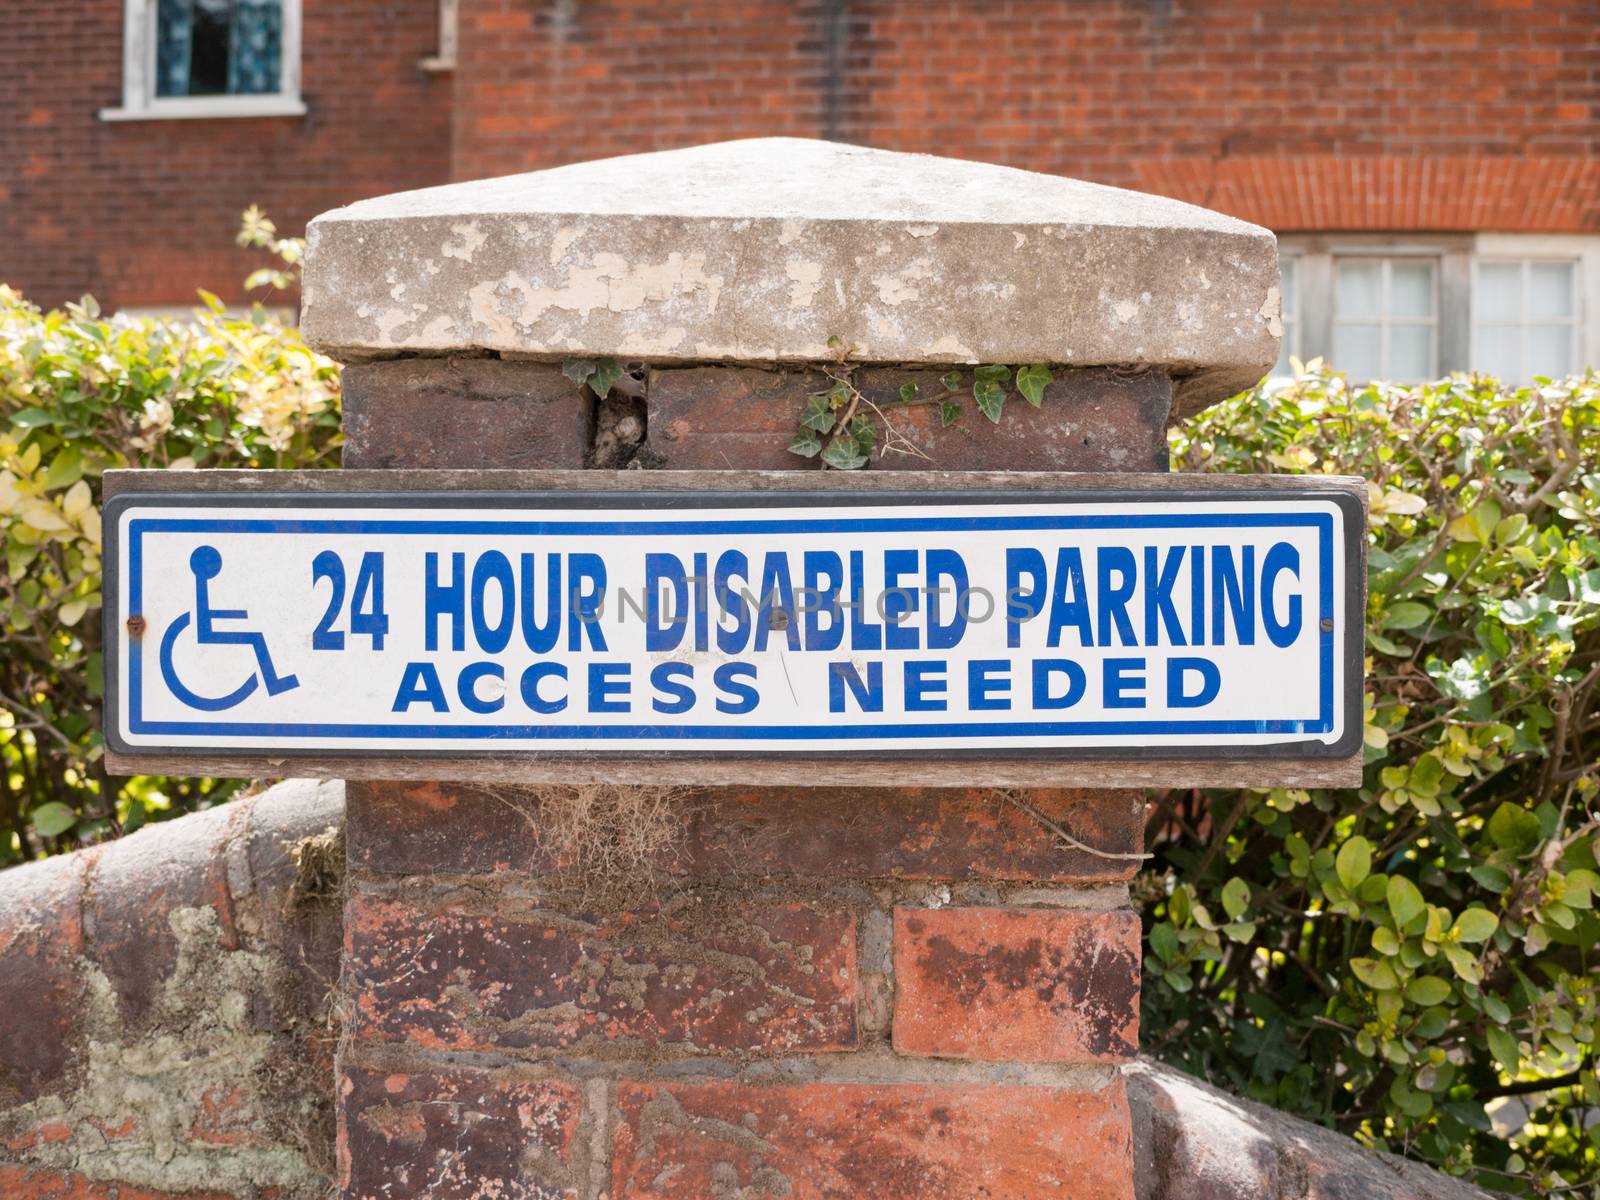 blue and white 24 hour disabled parking access sign on brick post outside